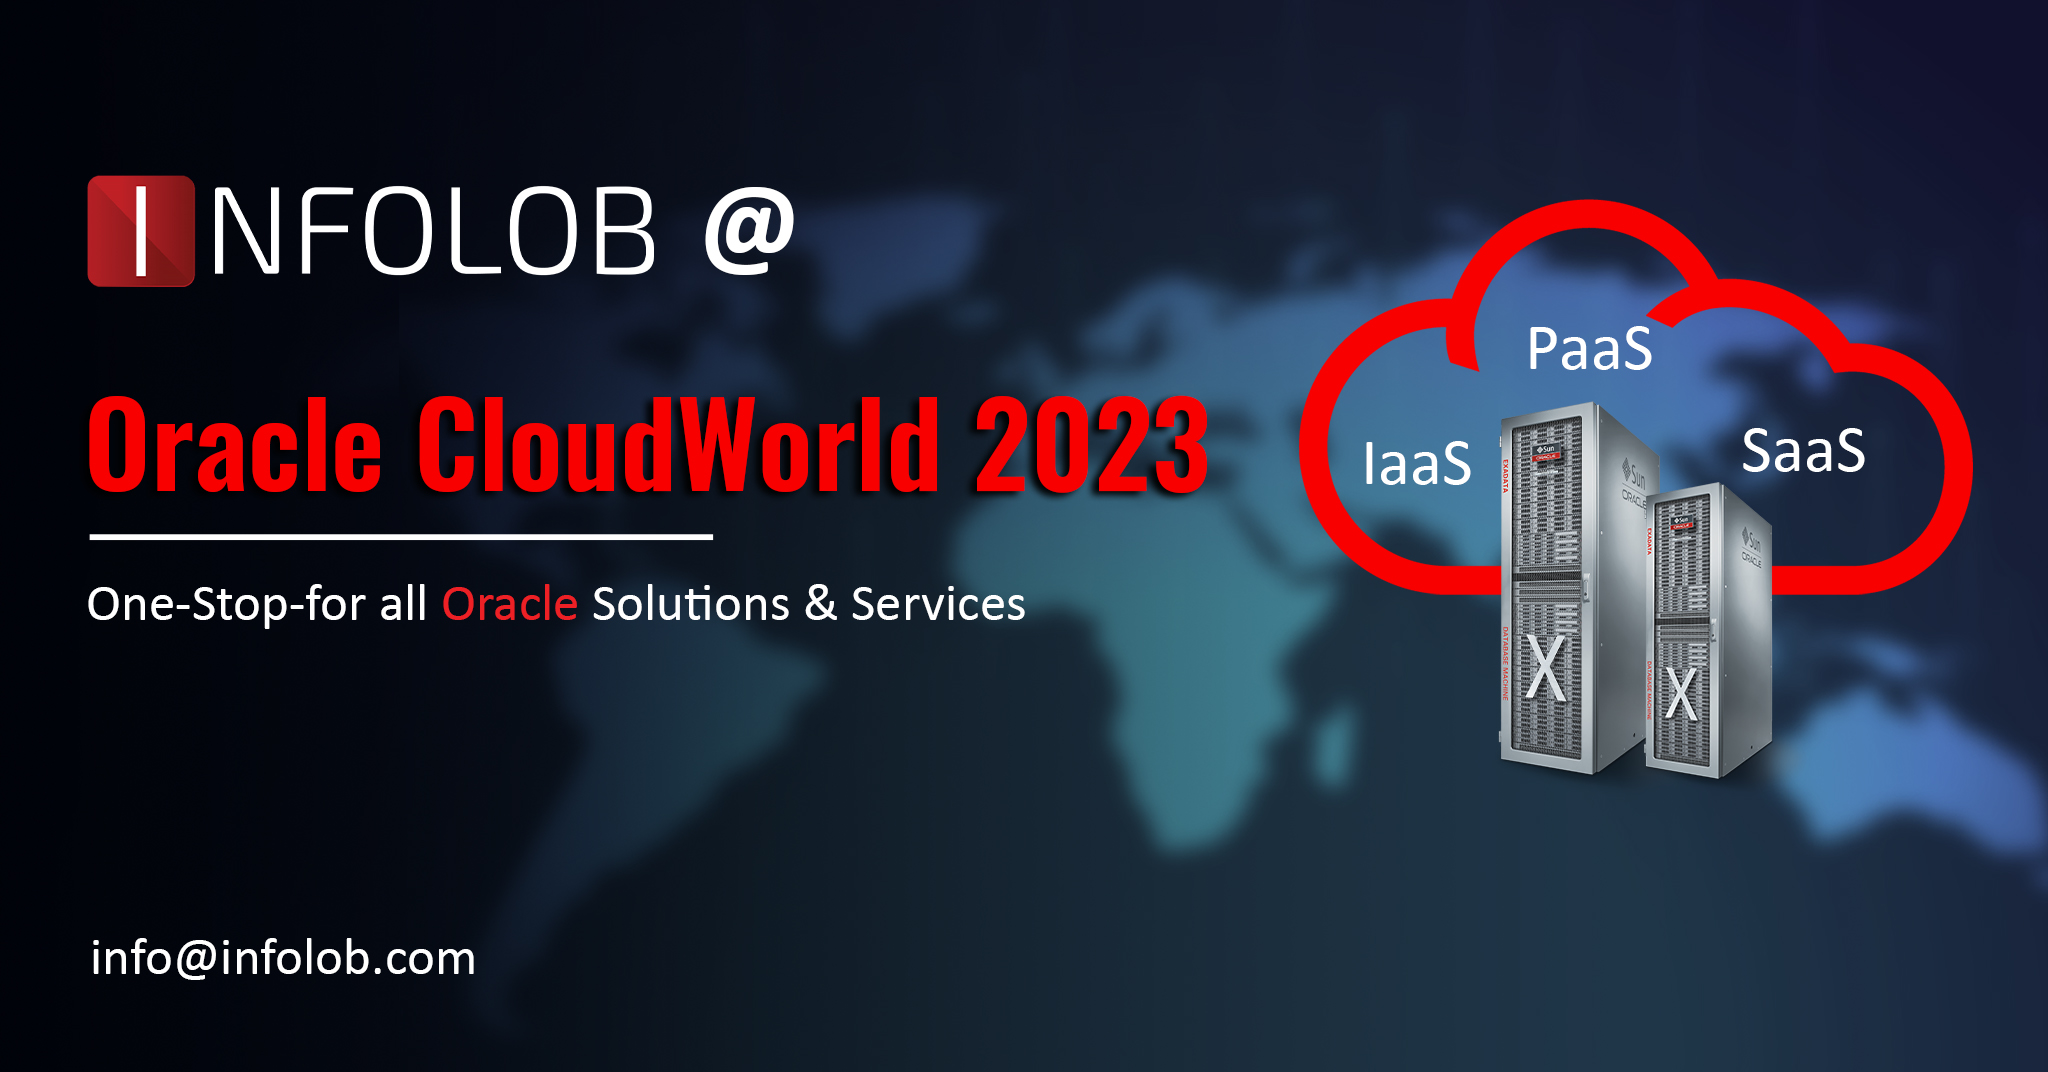 You are currently viewing INFOLOB @ Oracle CloudWorld 2023